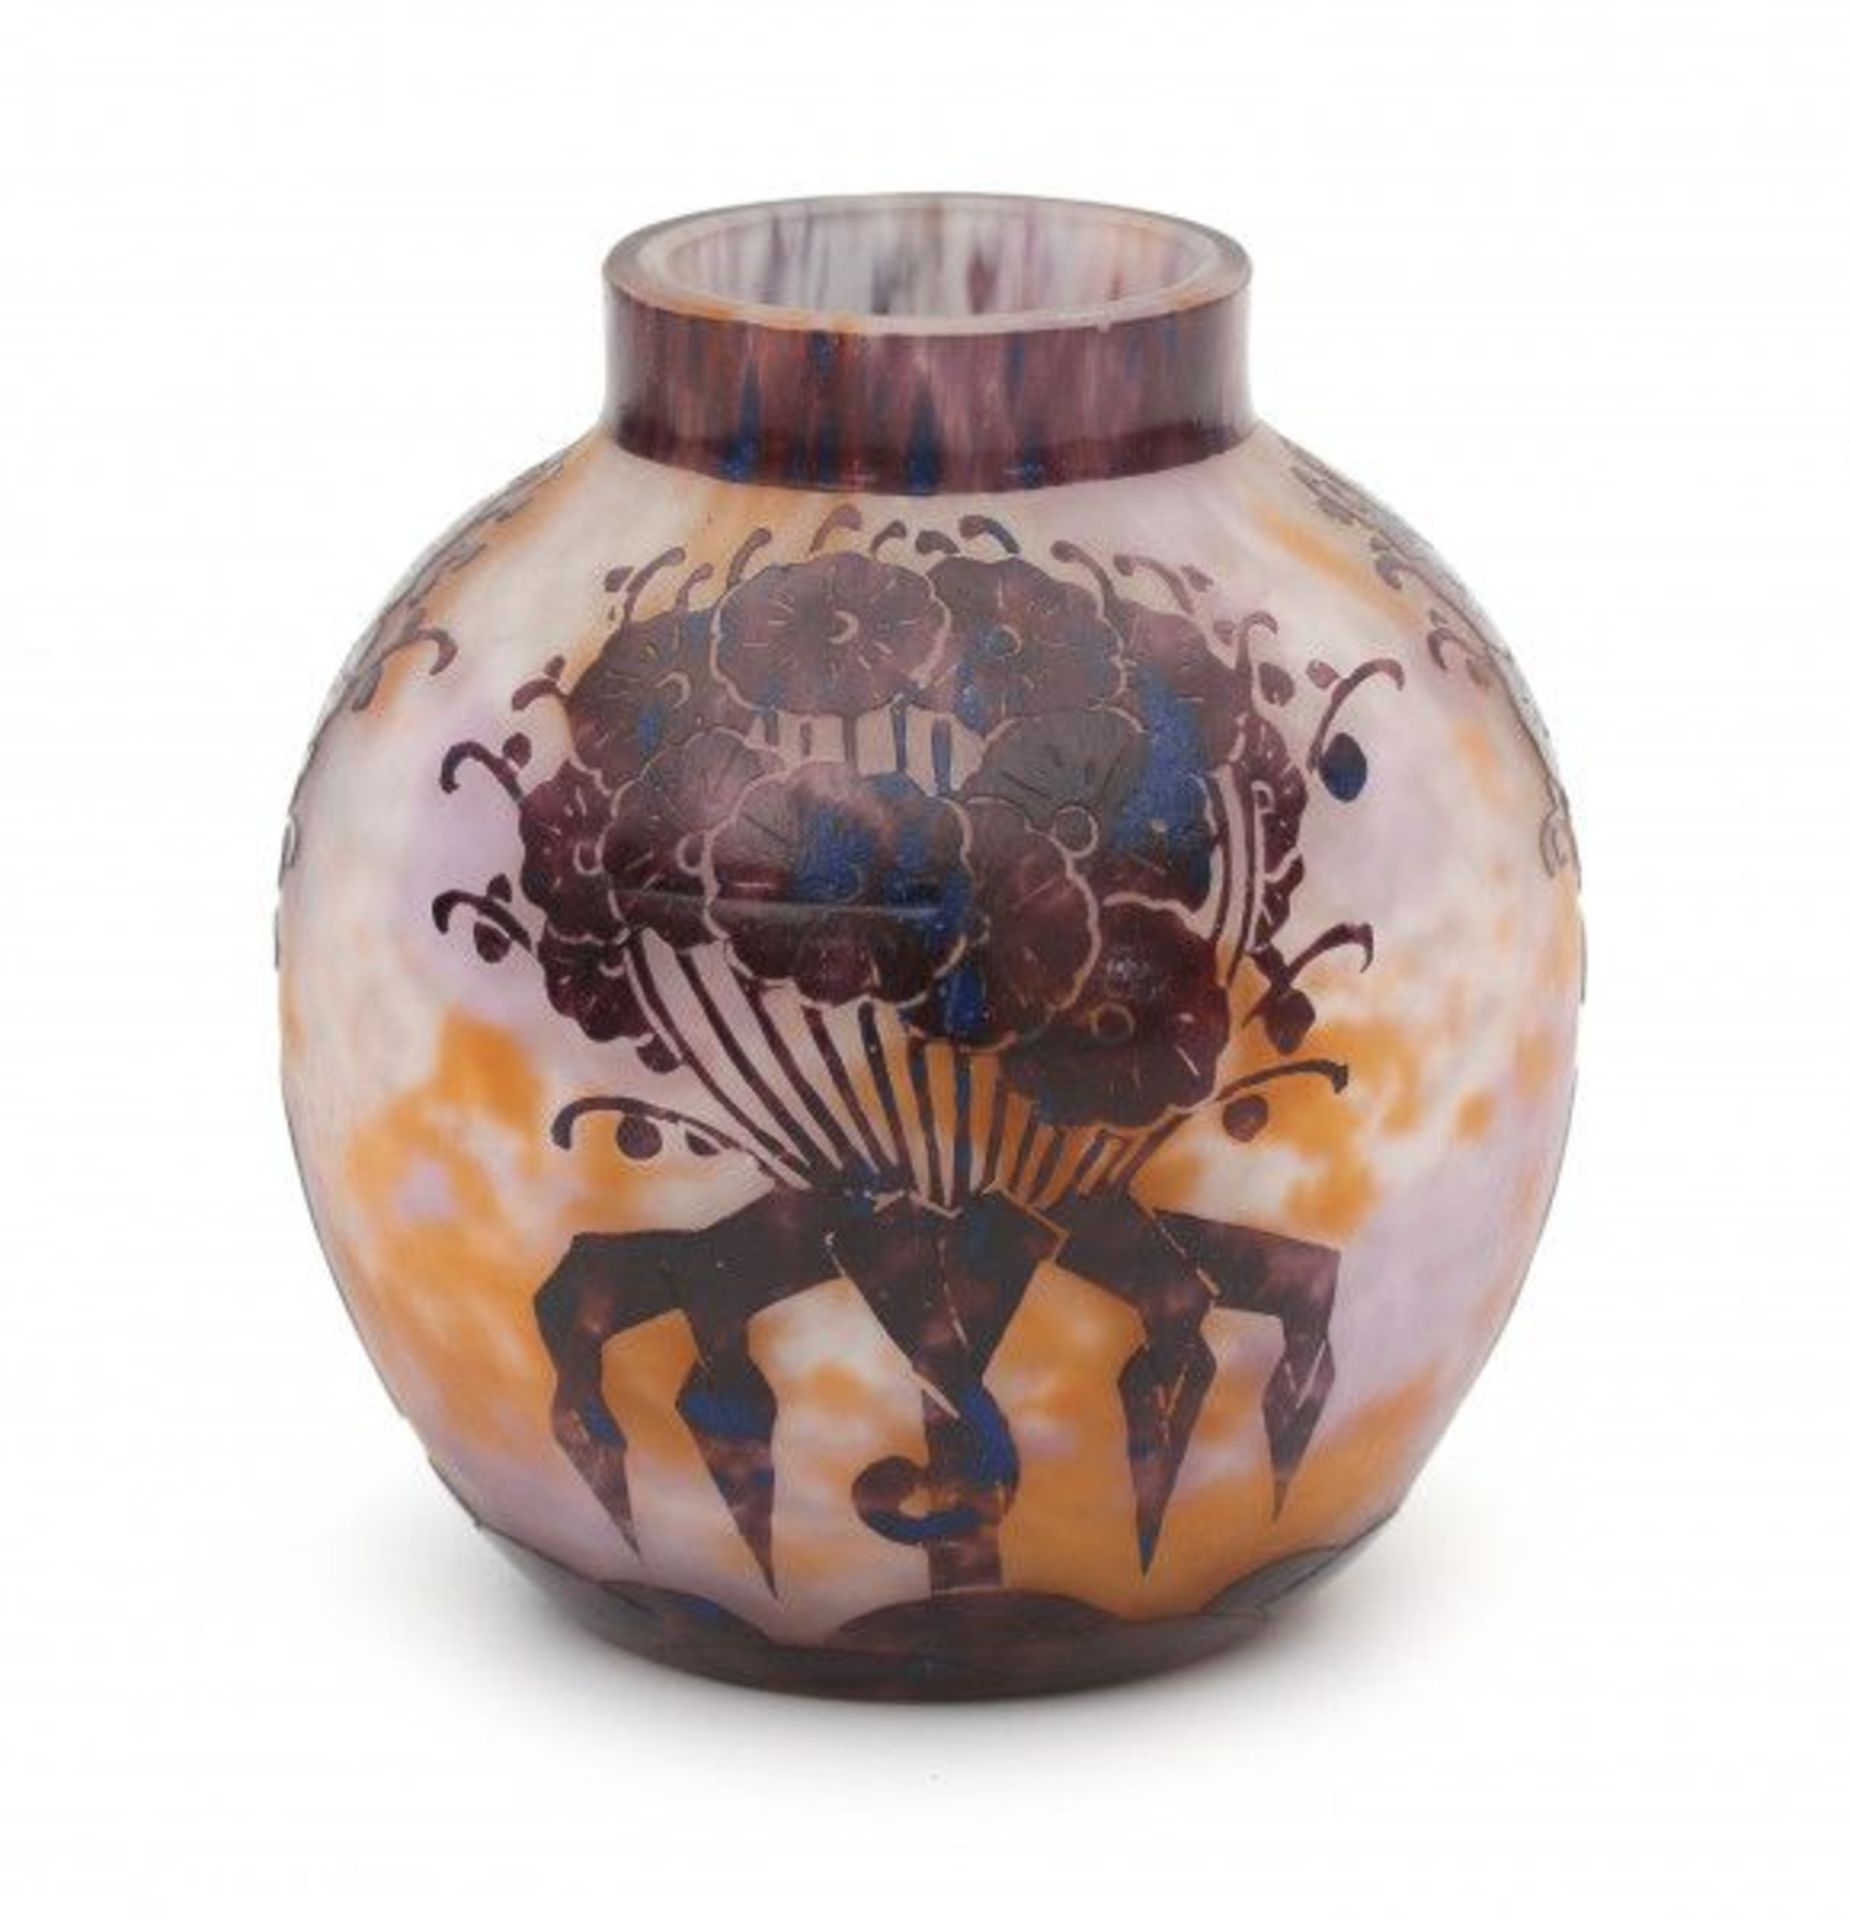 Charder, Le Verre FrançaisA globular cameo etched glass vase decorated with purple flowers, circa